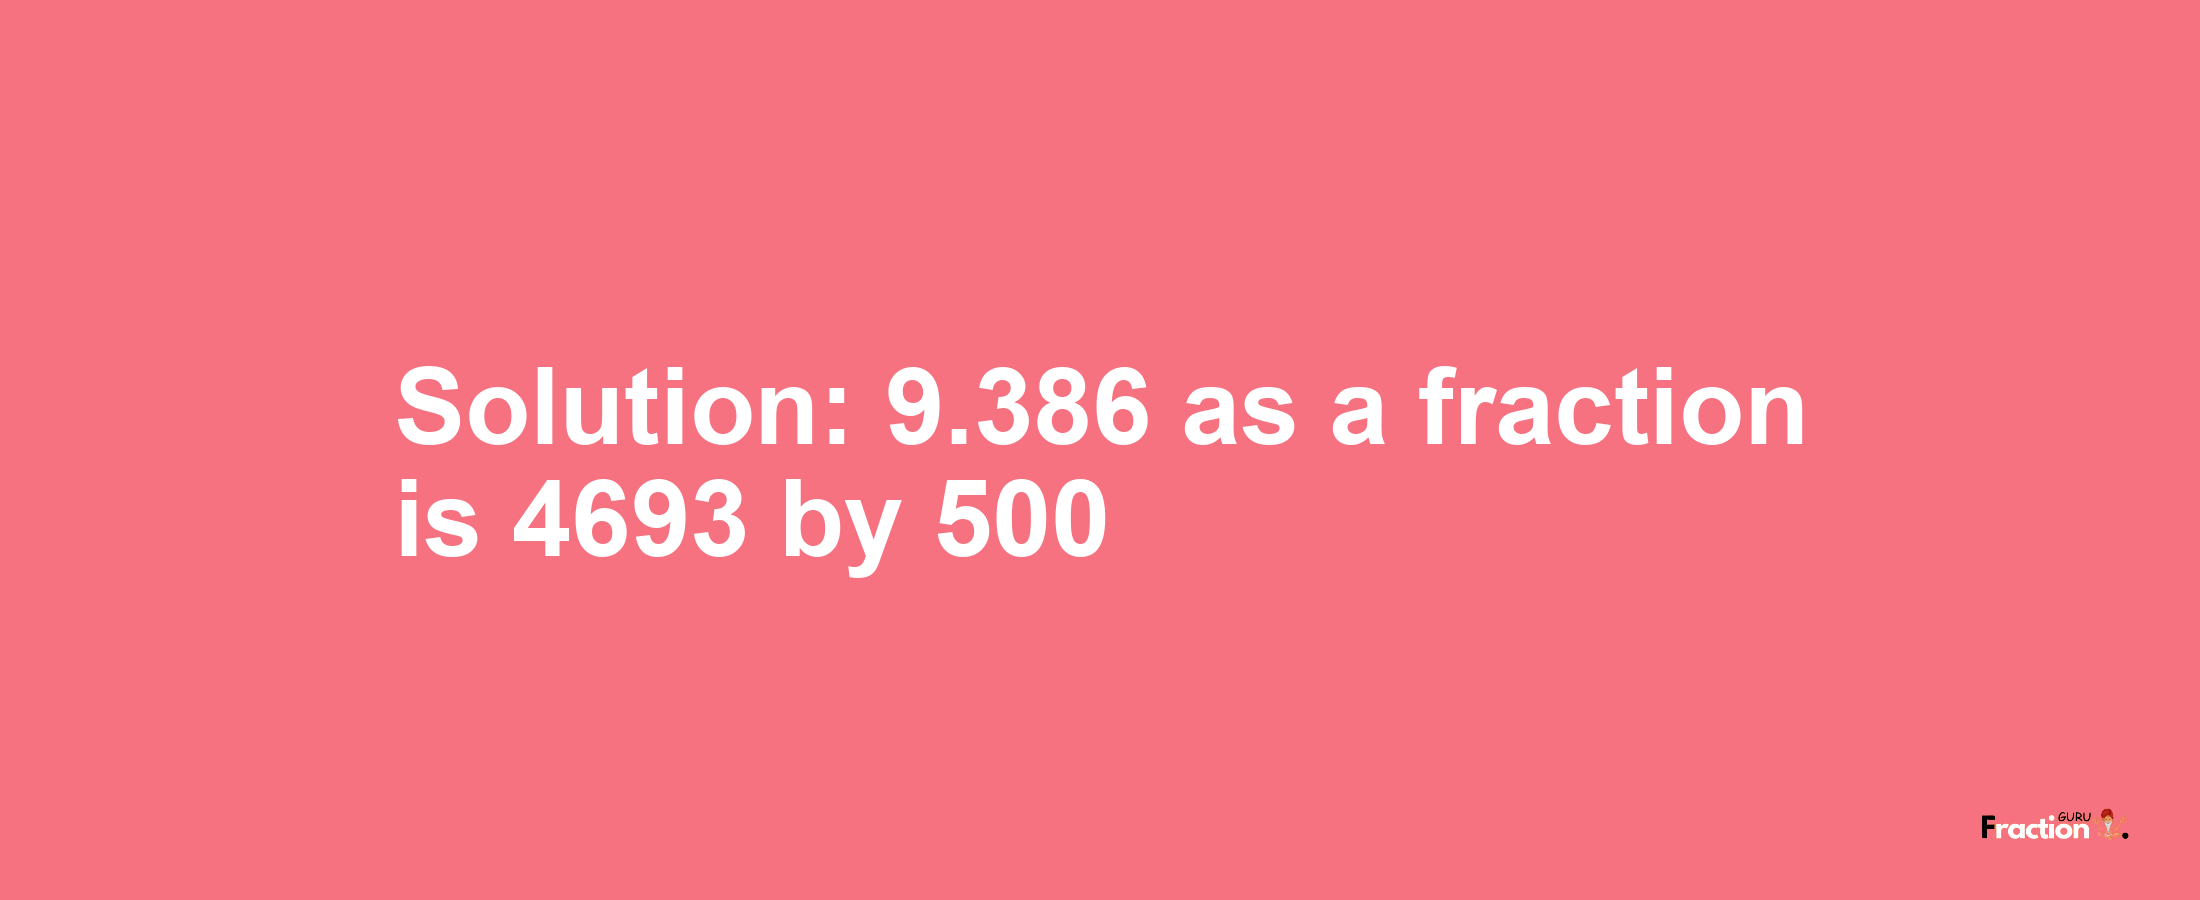 Solution:9.386 as a fraction is 4693/500